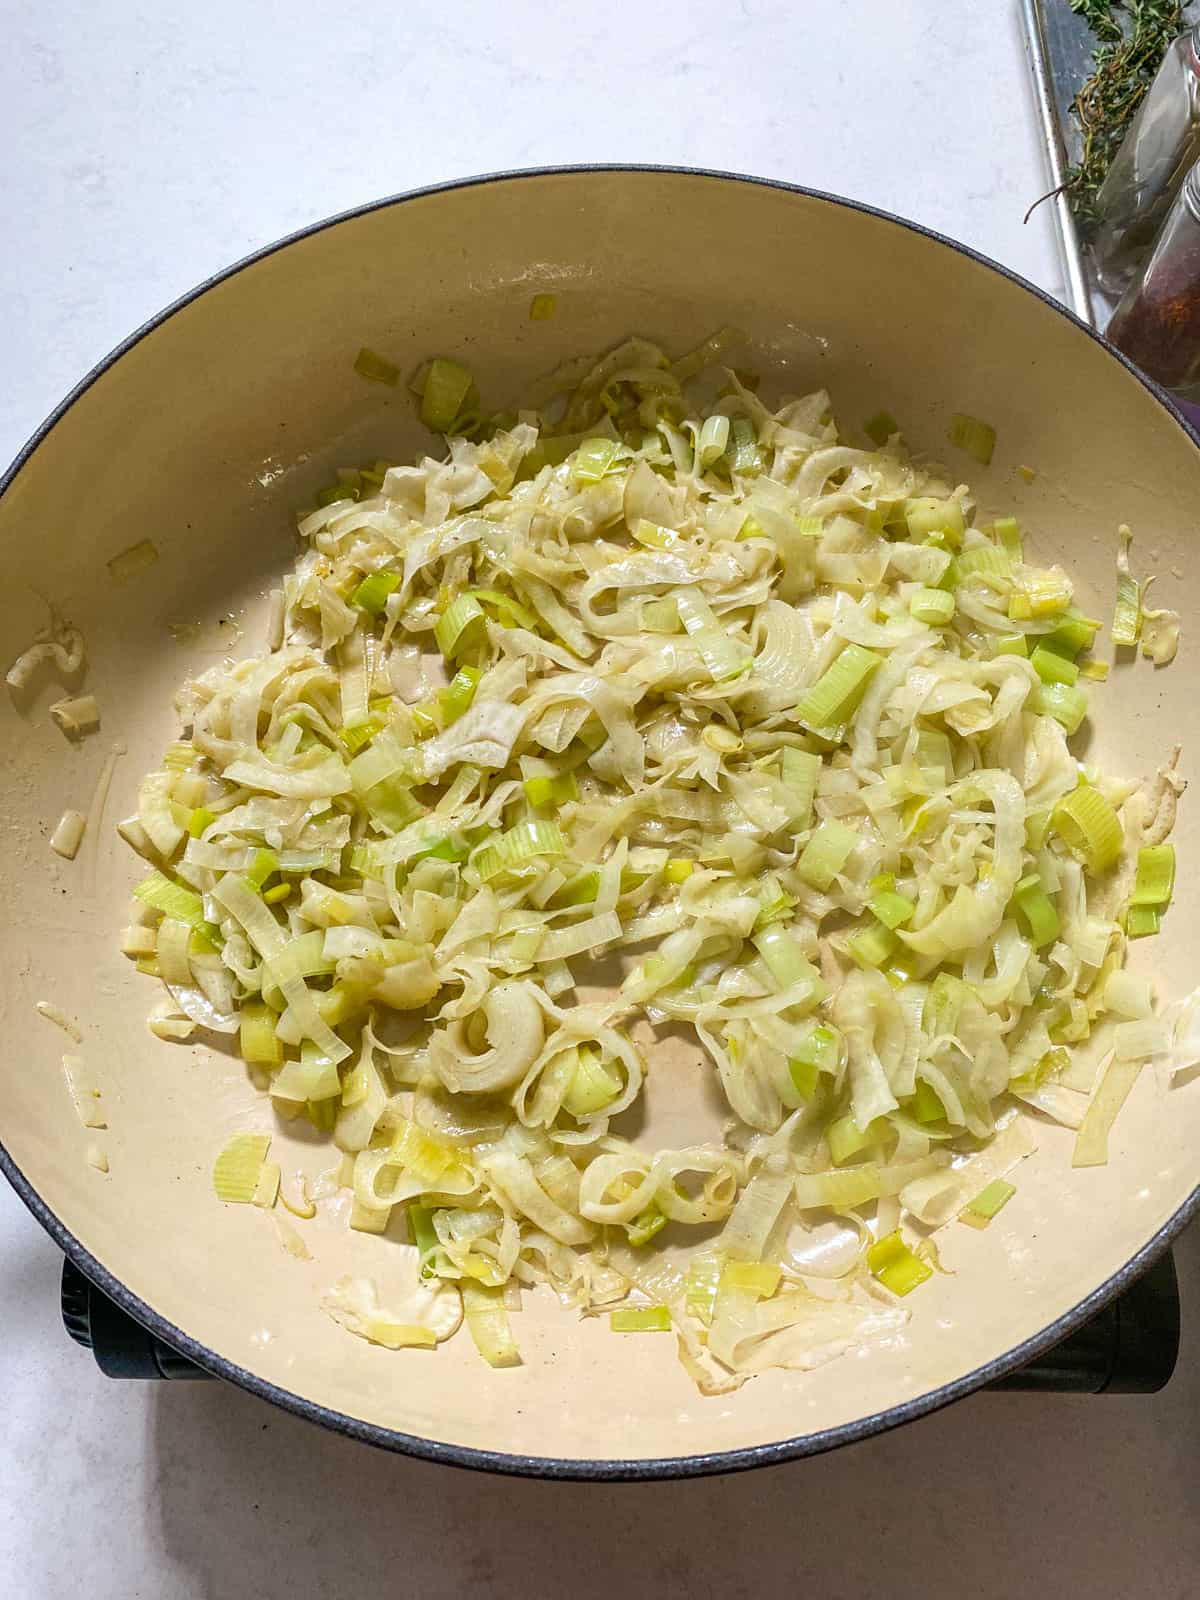 Saute the sliced fennel and leeks until softened.